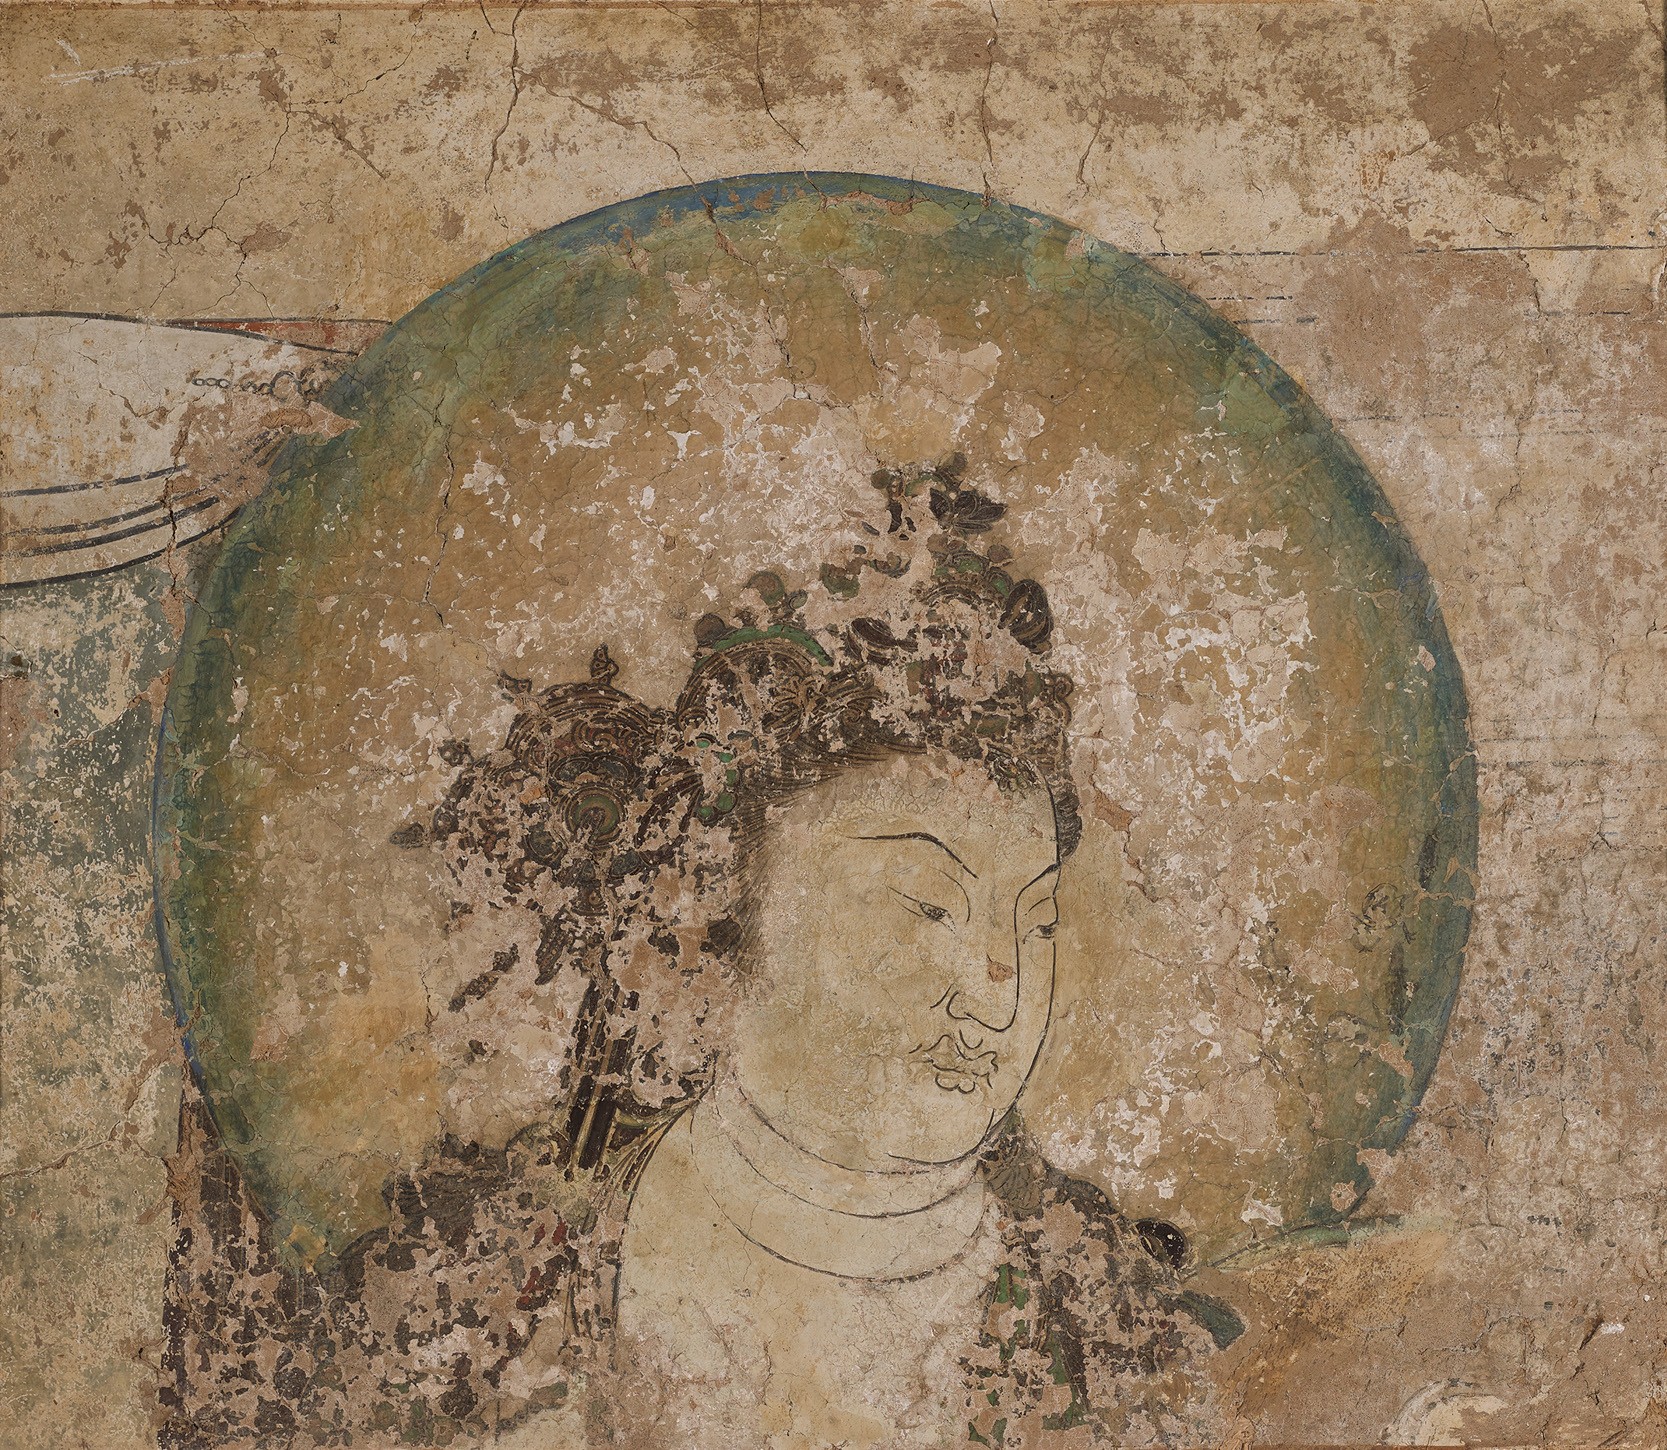 Head of a Bodhisattva, 960–1279, Song dynasty; China. Fresco. Art Properties, Avery Architectural & Fine Arts Library, Columbia University, Arthur M. Sackler Collections.